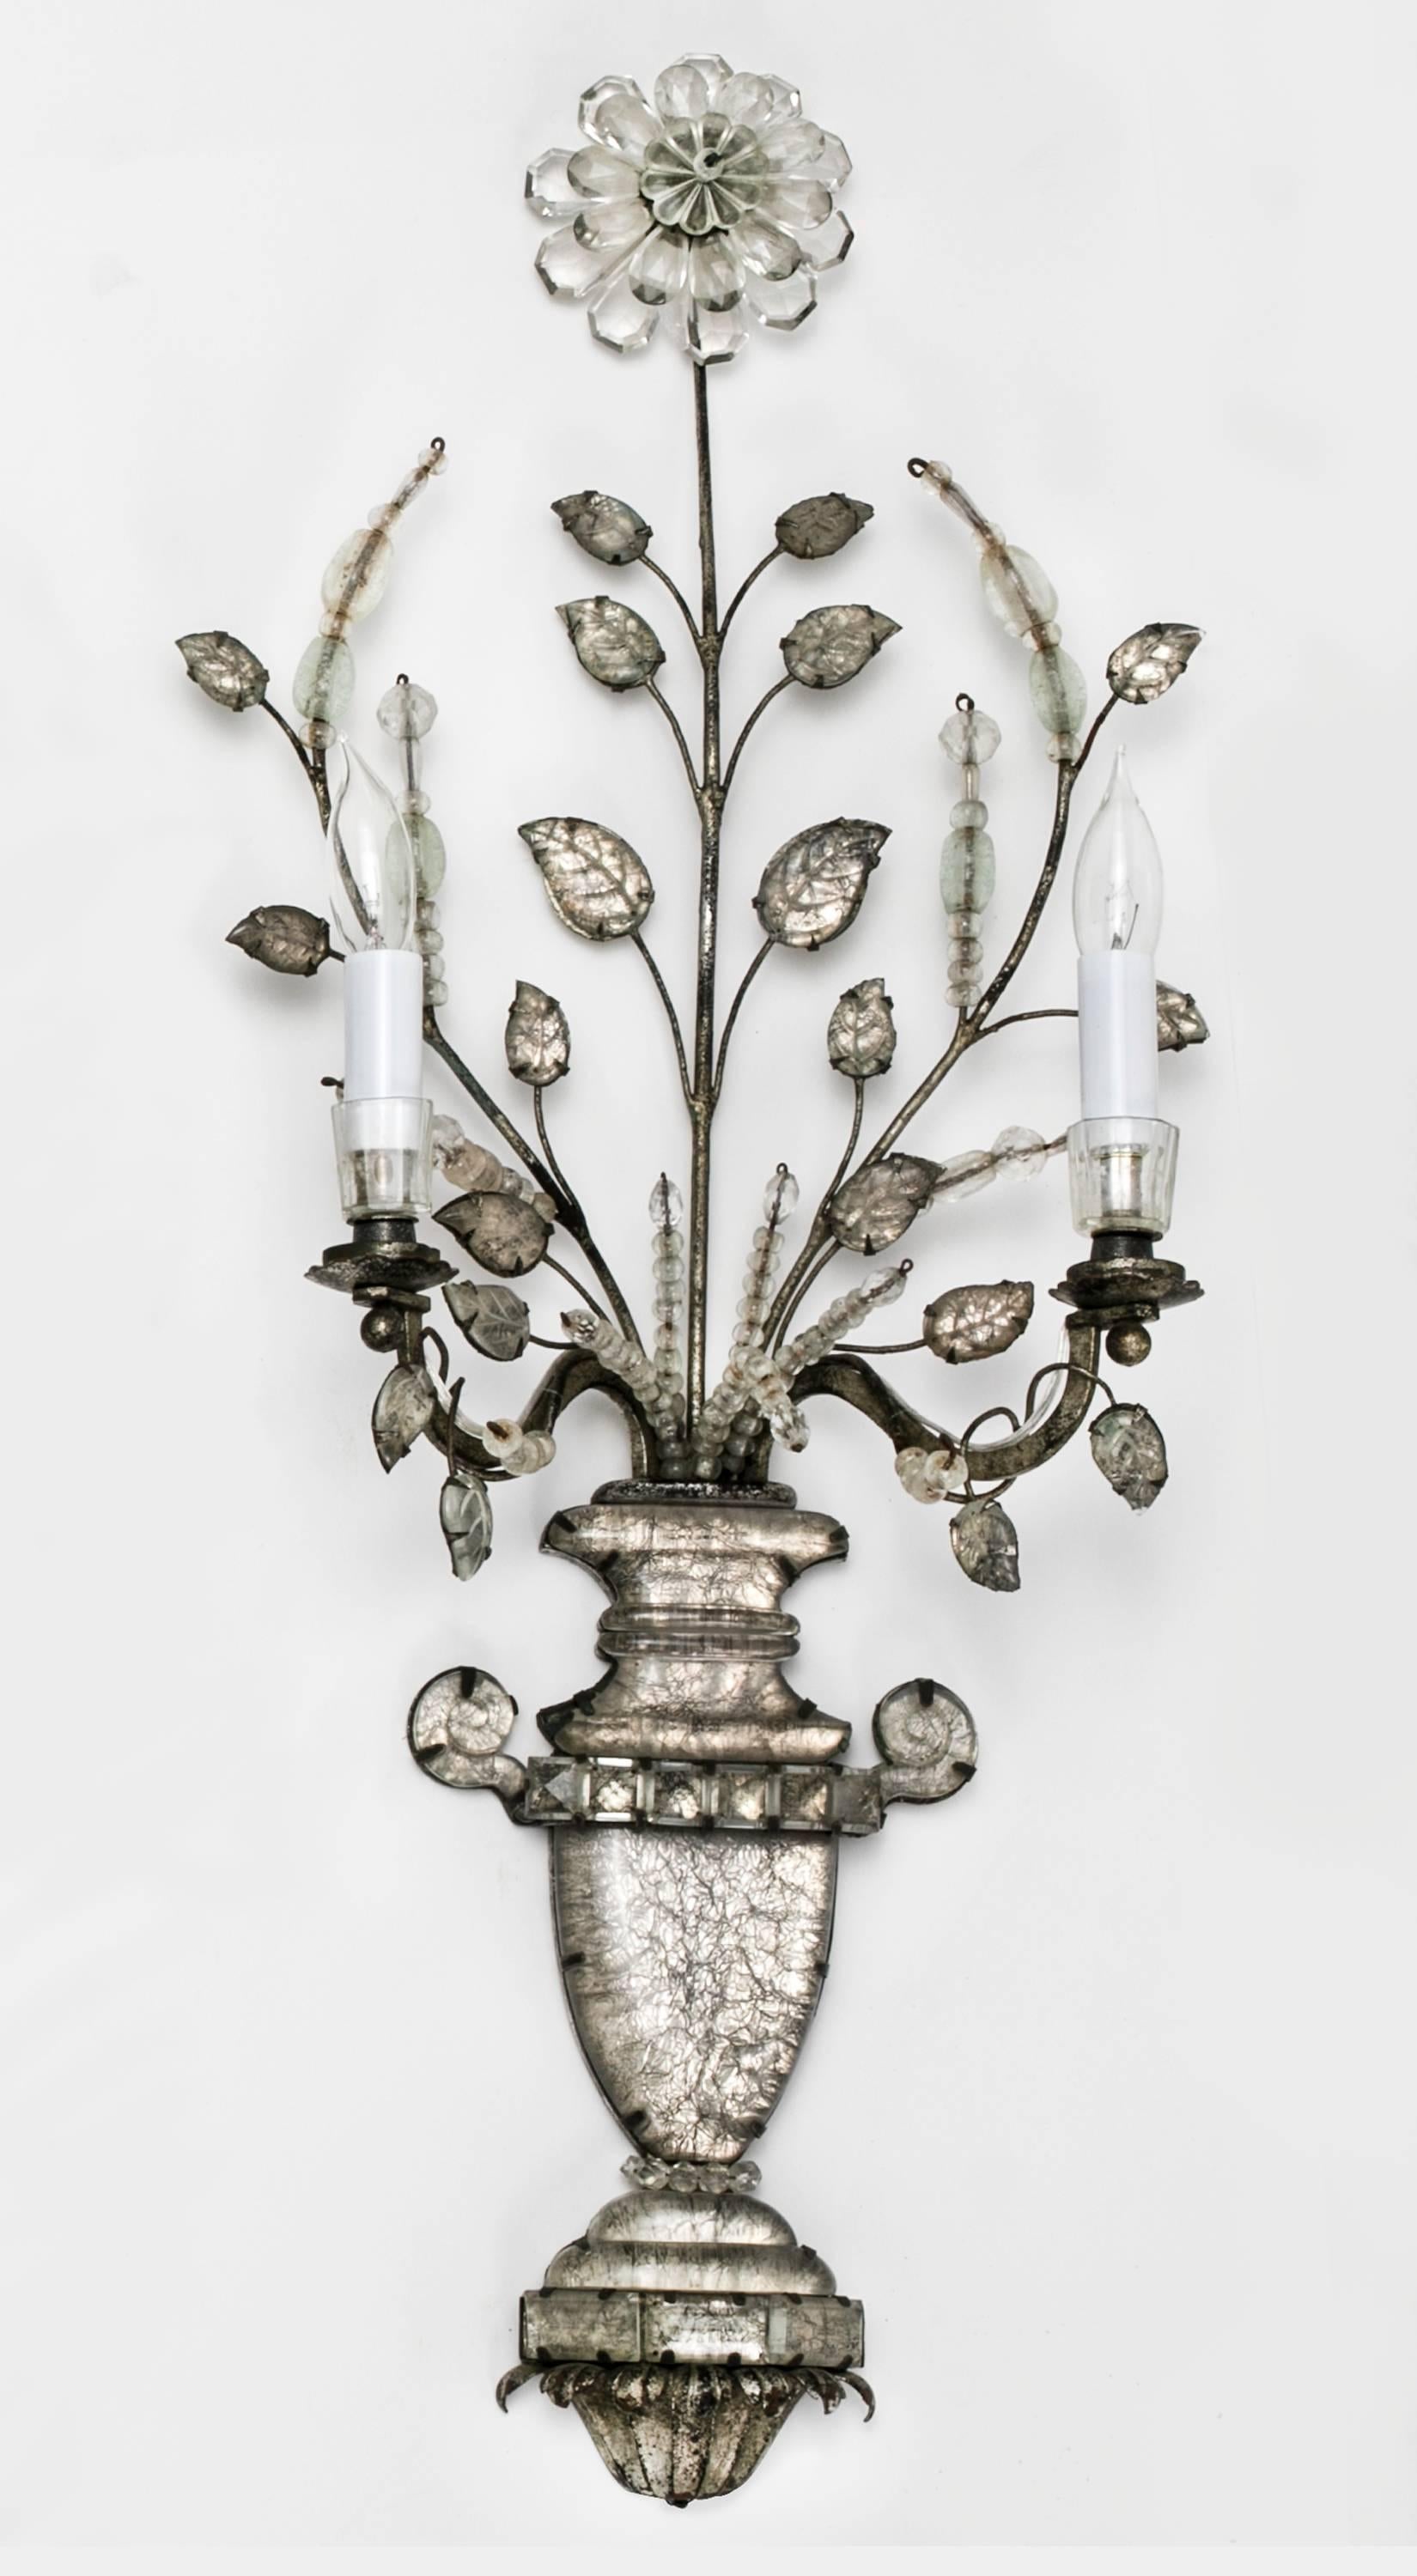 Antique French Maison Baguès, beautiful set of four wall light sconces, circa 1880s. Carved crystal glass vase with floral leaves in shimmering silver gilt. 
Each sconces have two candle lights. New electric wireing, ready for installation.